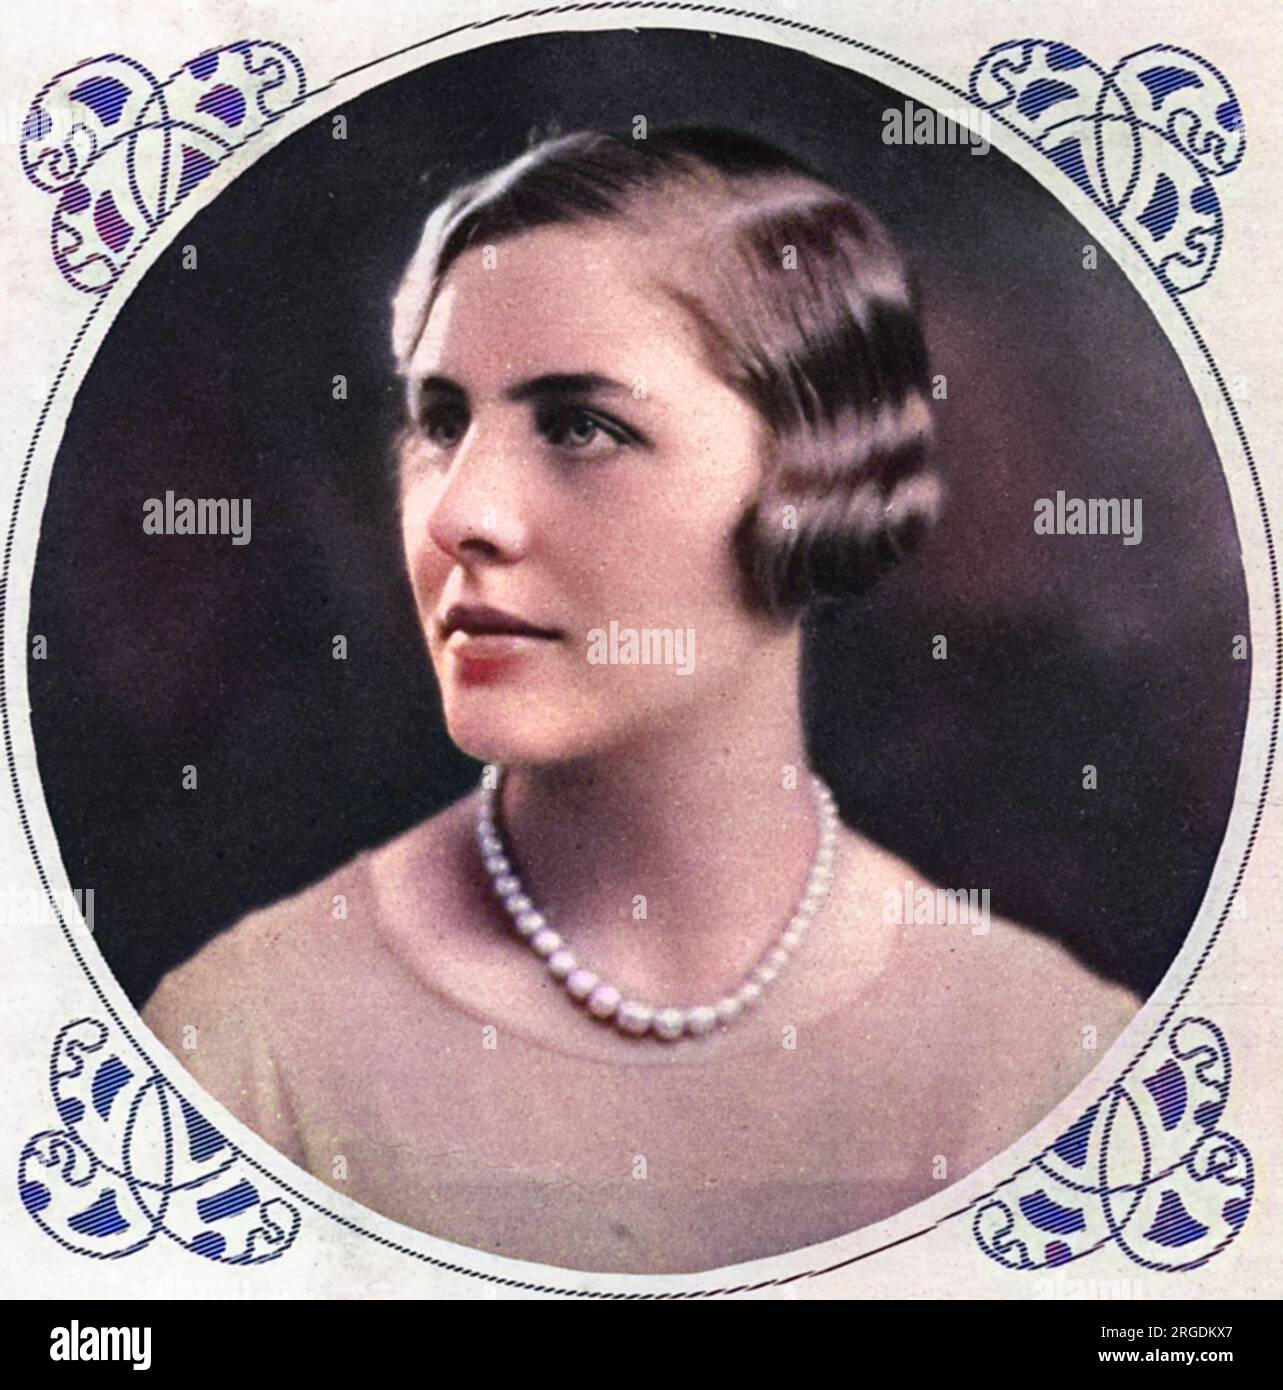 Portrait of Pamela Freeman-Mitford, second of the six Mitford sisters, pictured in The Sketch at the time of her engagement to Oliver Watney, from the famous brewing family.  The engagement was later broken off. Stock Photo